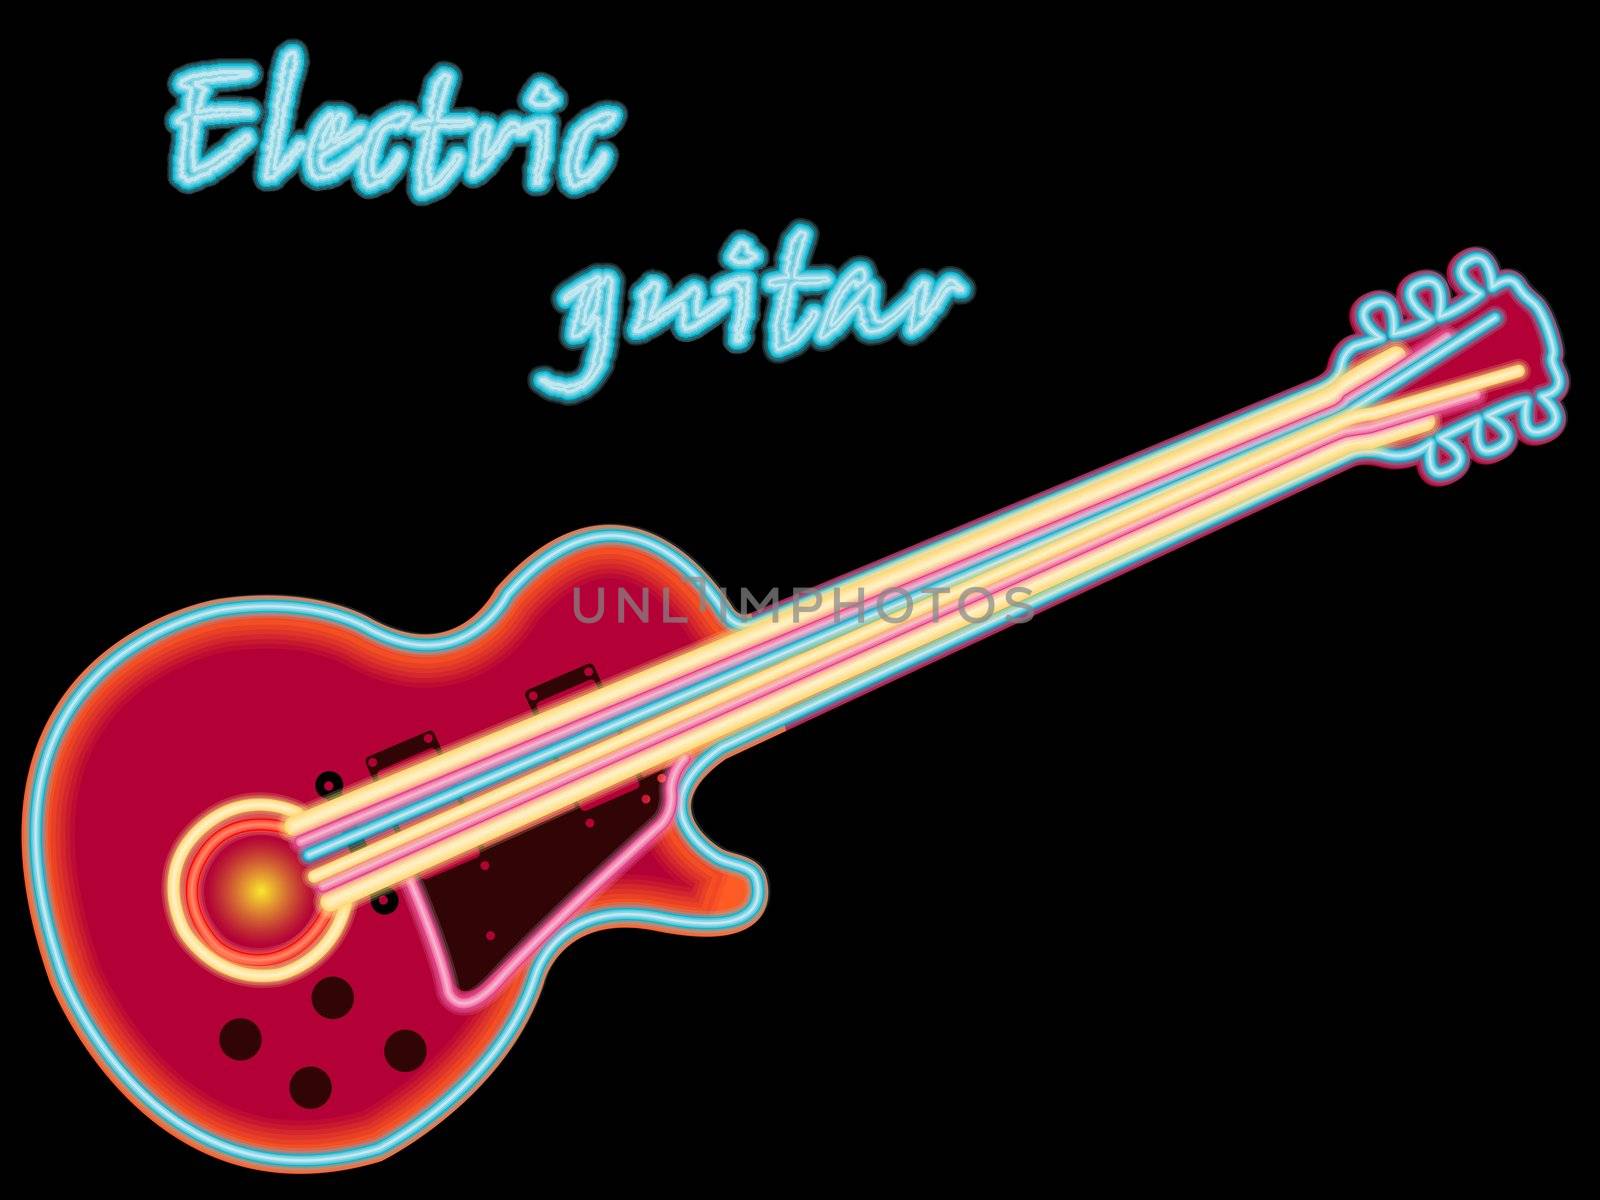 electric neon guitar against black background, abstract vector art illustration